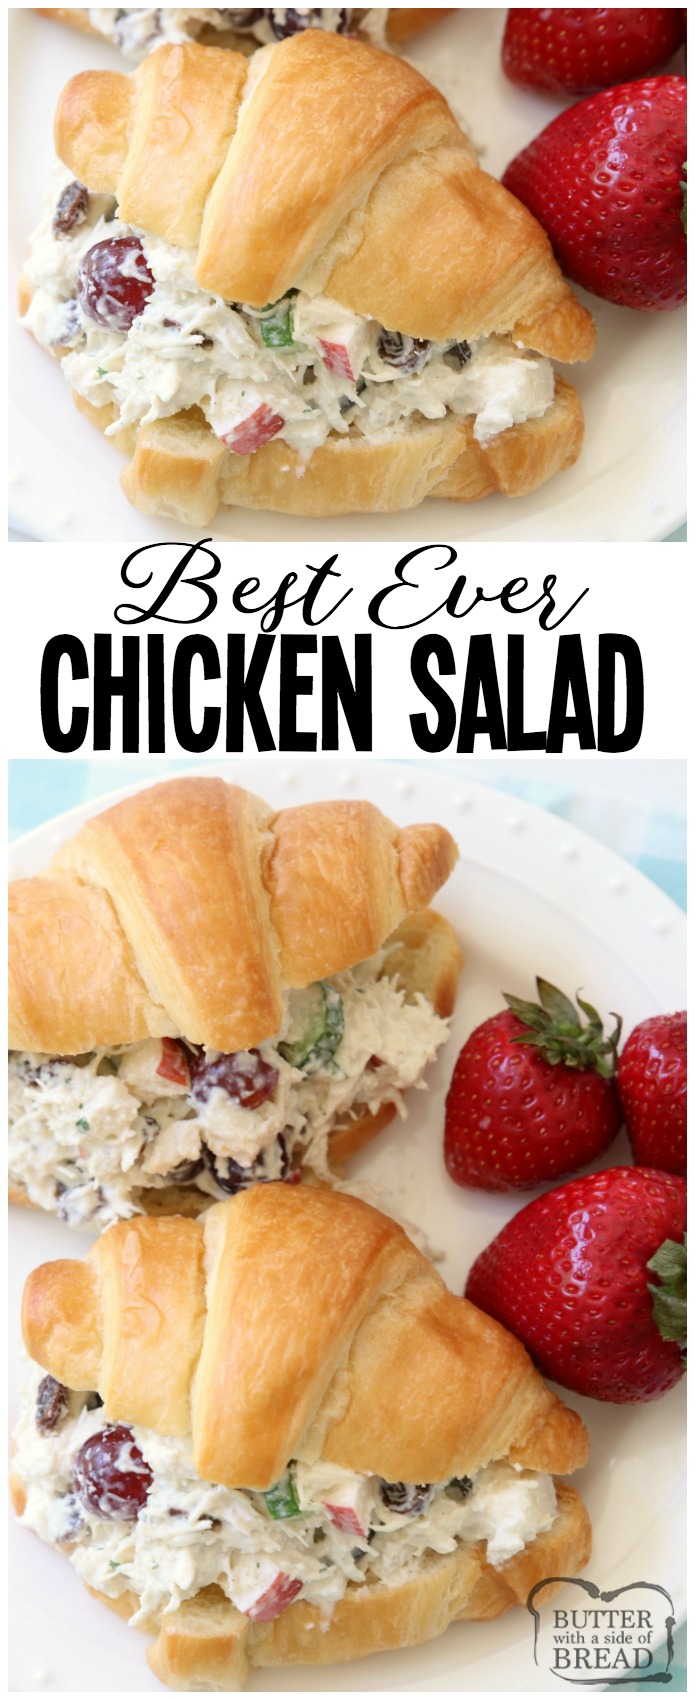 Easy 5-Minute Chicken Salad recipe that's the BEST I've ever tasted! The simple dressing really makes it perfect. Chicken Salad recipe made with diced chicken, plain yogurt, apples, grapes, celery, cucumber, raisins and more! Great as chicken salad sandwiches or in lettuce as a wrap or on crackers. #chicken #salad #lunch #brunch #chickensalad #protein #healthy #recipe from Butter With A Side of Bread